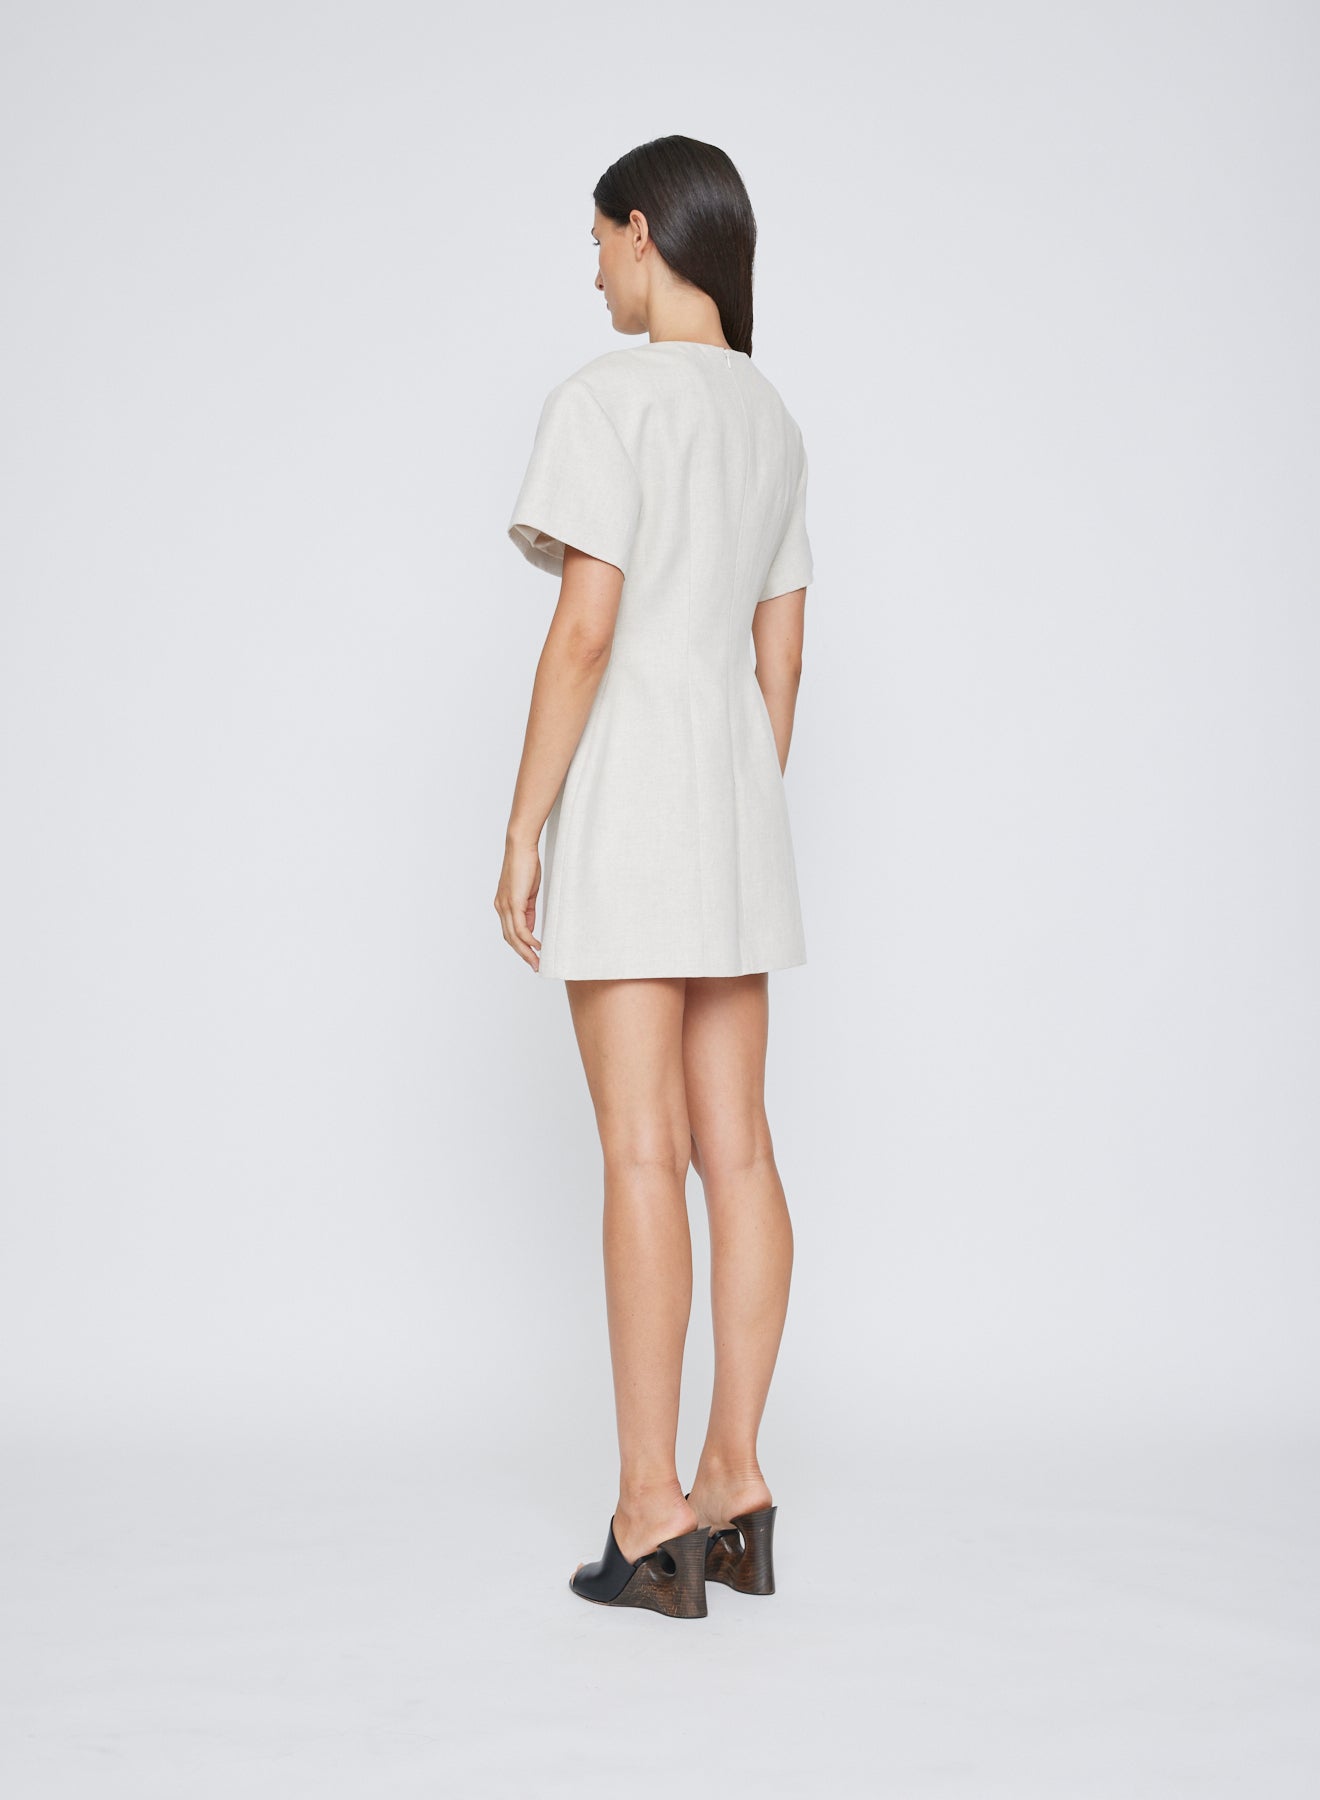 Elevate your every day with ANNA QUAN'S versatile Mini A-Line Dress featuring short sleeves – a perfect addition to your dresses collection. Mini dress, micro mini dress, linen dress, linen mini dress, brunch dress, day dress, every day dress.